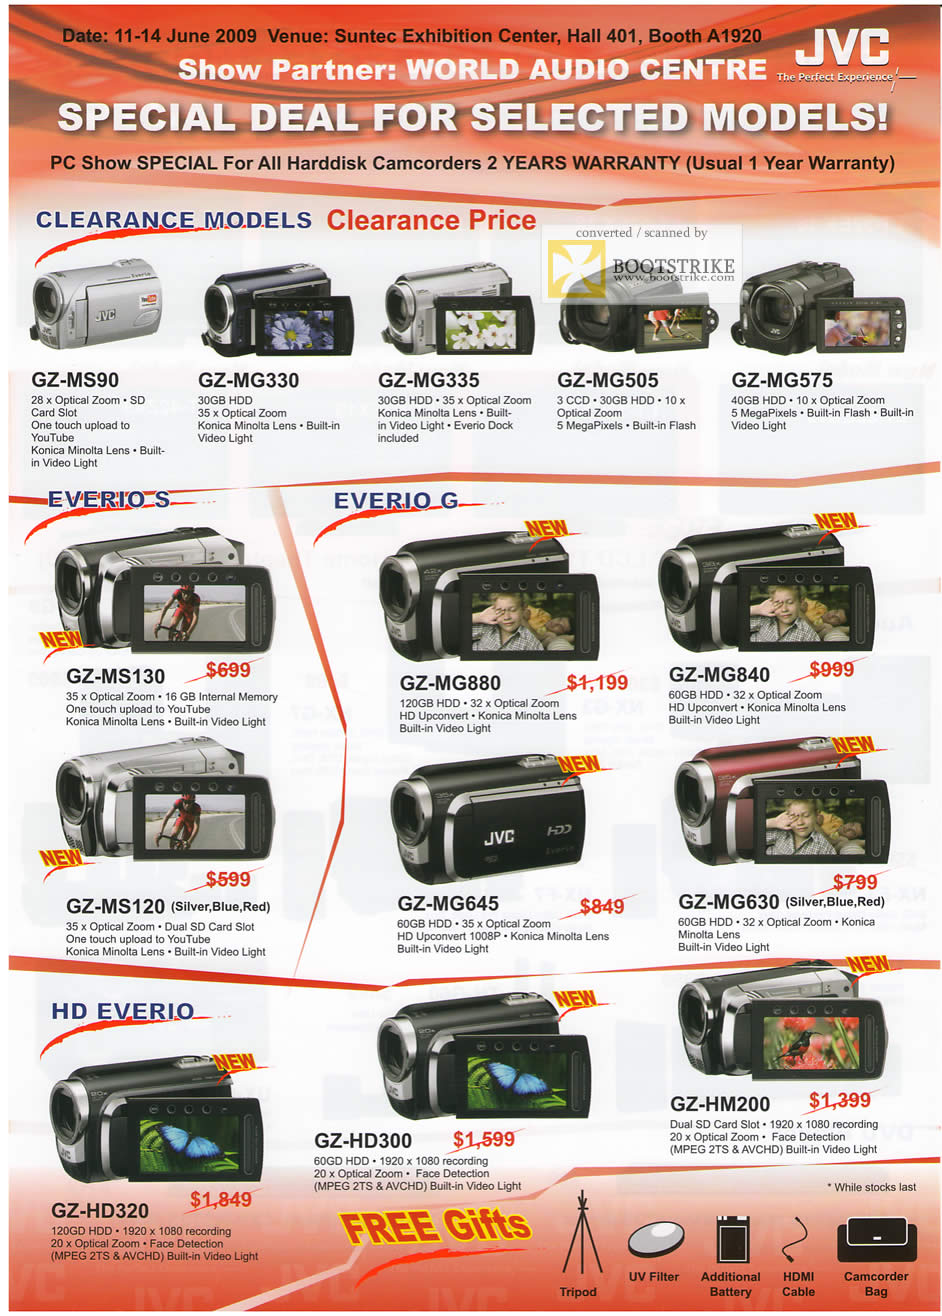 PC Show 2009 price list image brochure of JVC Harddisk Camcorders Everio S G HD GZ